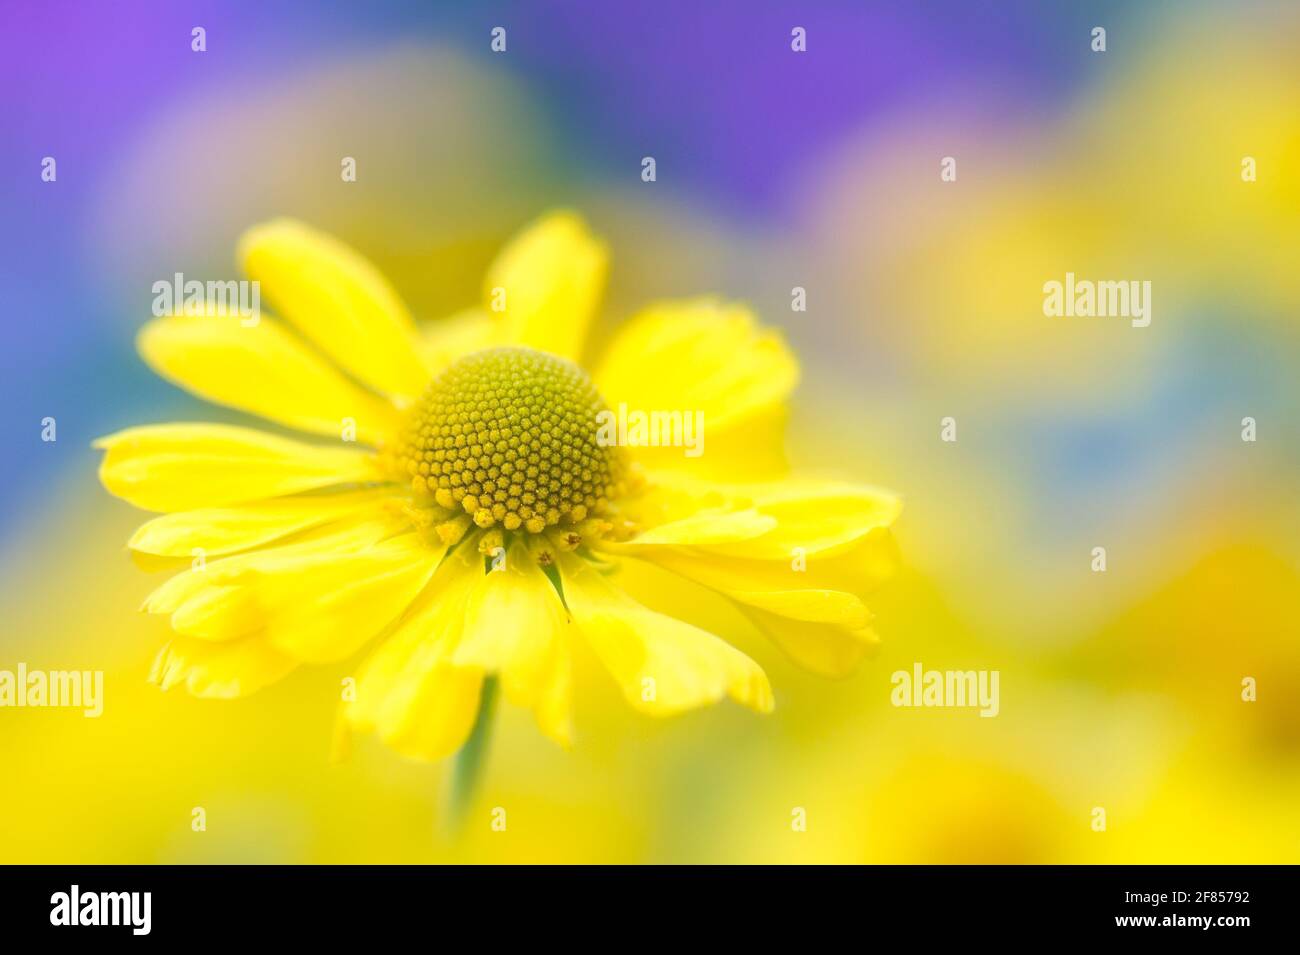 Attractive close-up of a single bright yellow helenium flowerhead with a beautiful purple, blue blurred background. Stock Photo